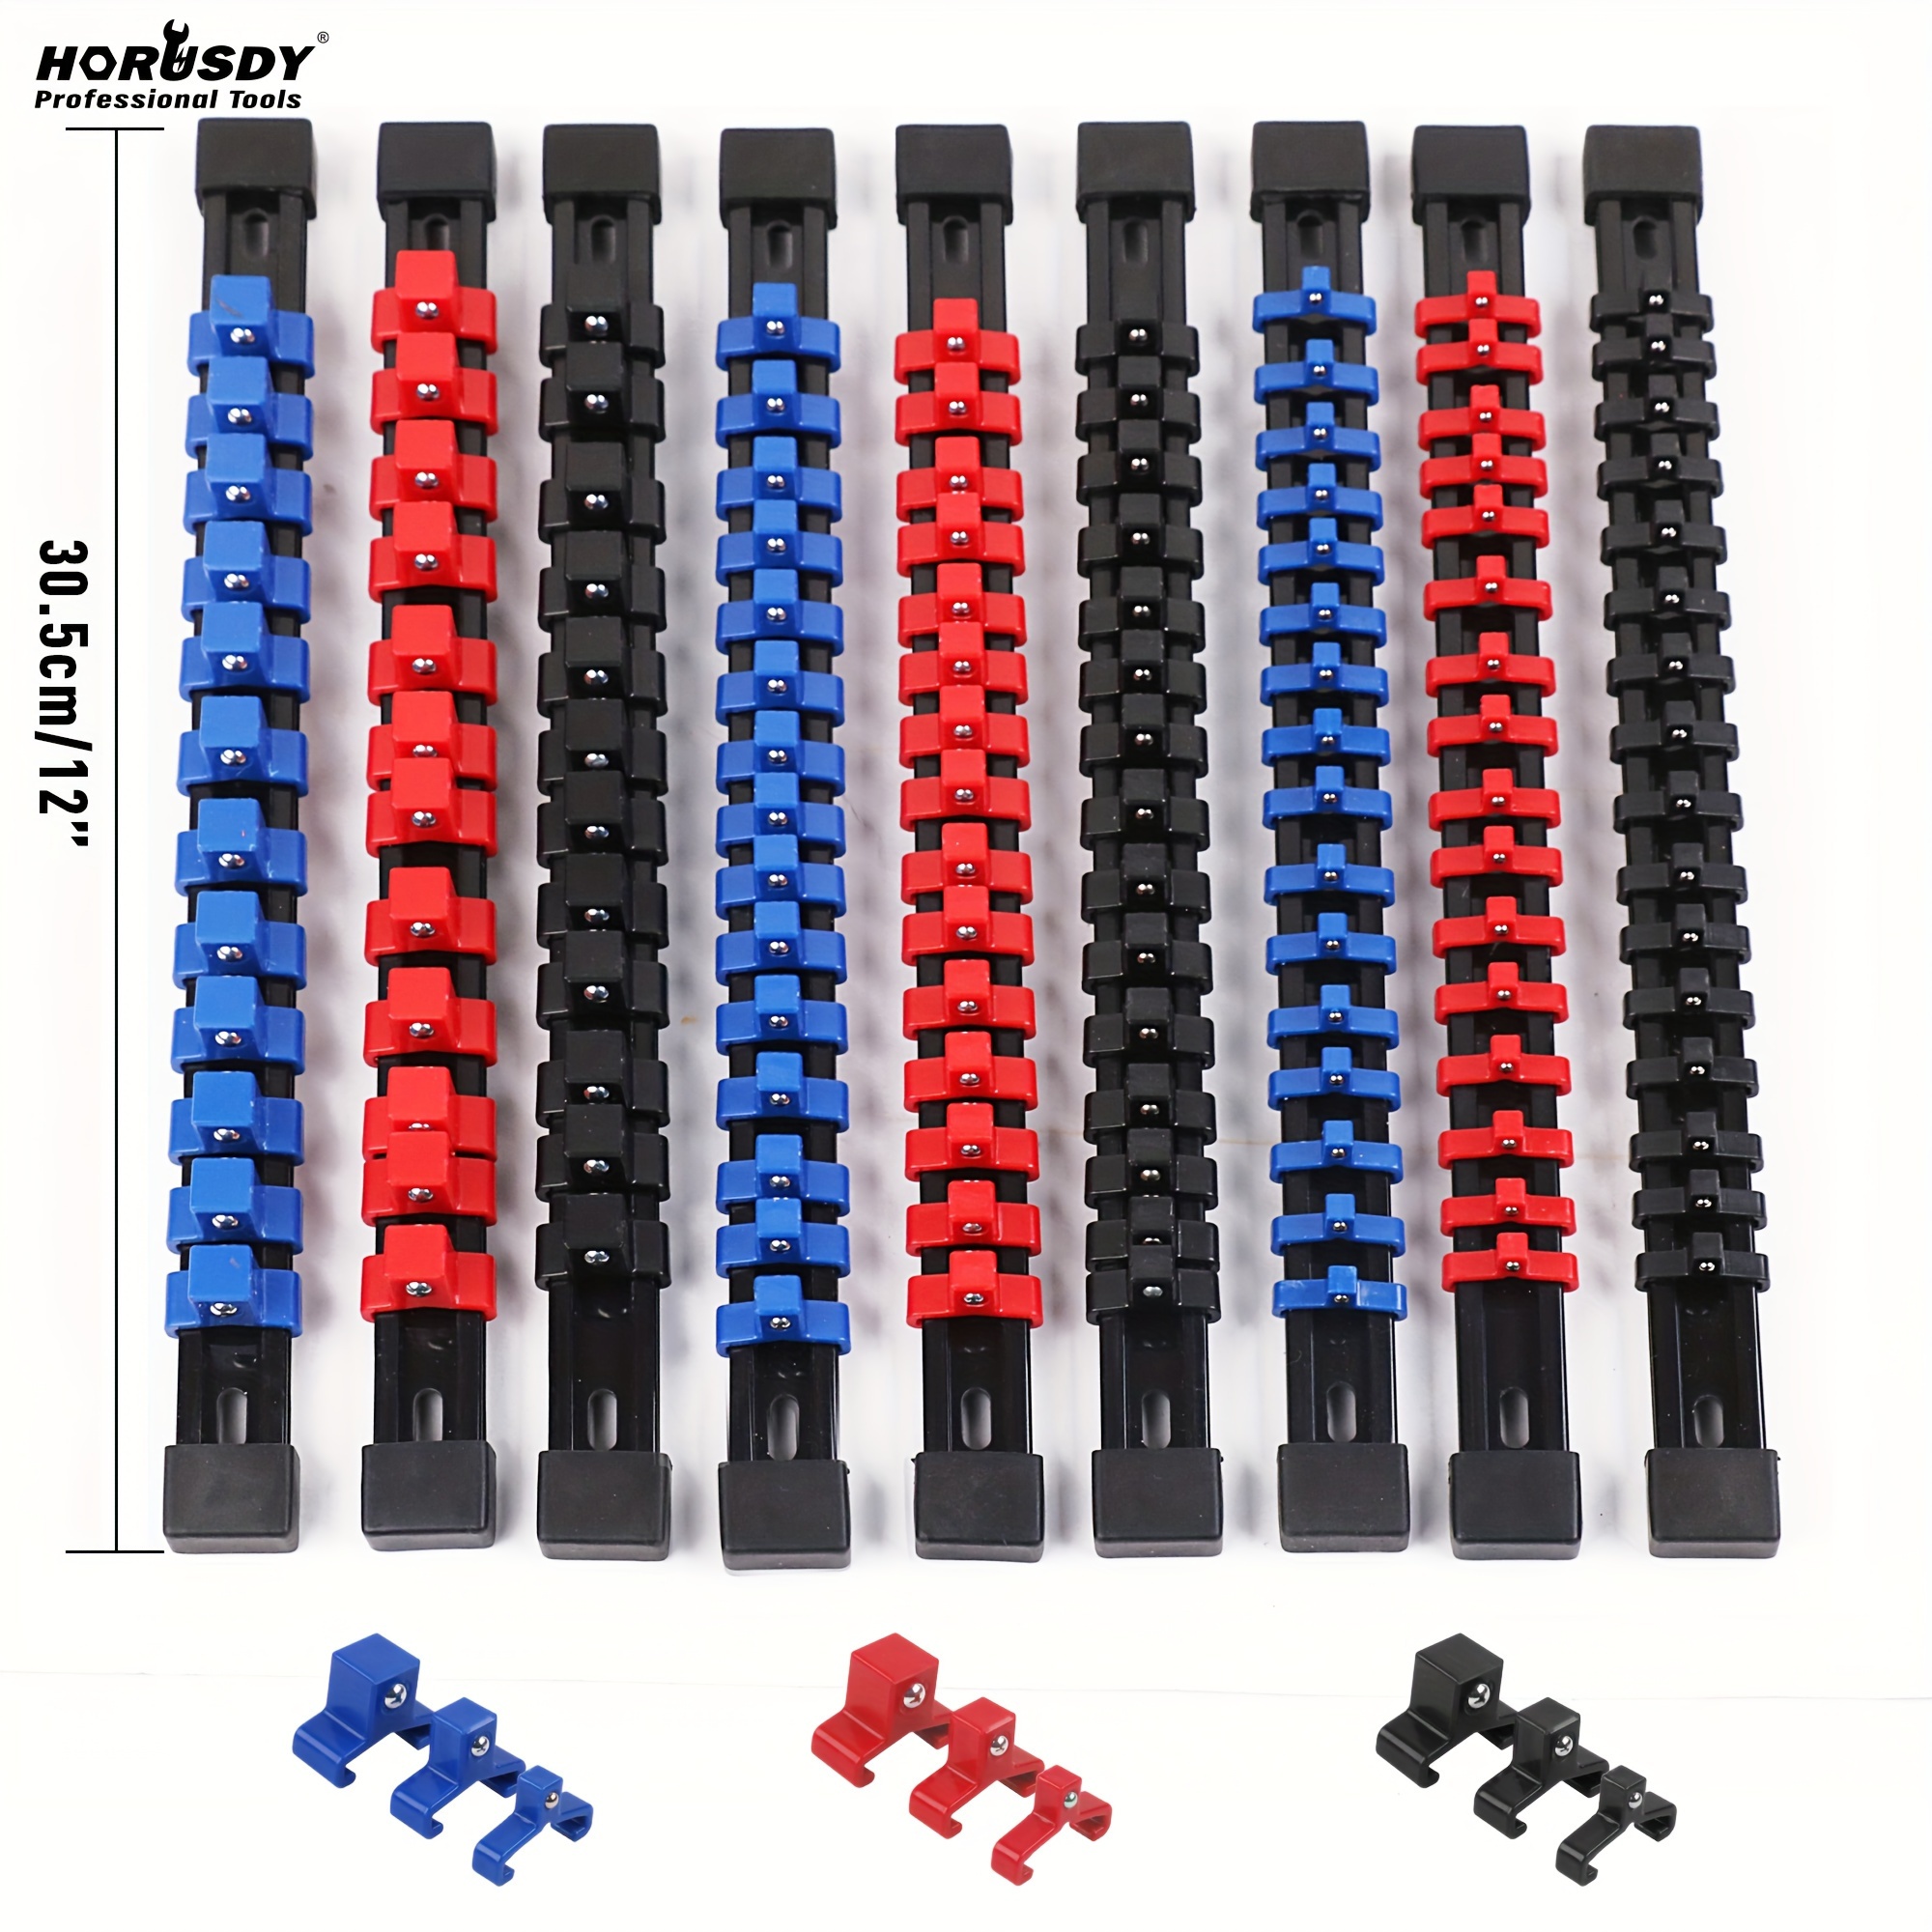 

Horusdy 9pc Abs Socket Organizer, 1/2 Inch, 3/8 Inch And 1/4 Inch Drive Socket Rail Holders, Heavy Duty Socket Racks, Black Rails With Red Blue Black Clips Included 9 Extra Clips